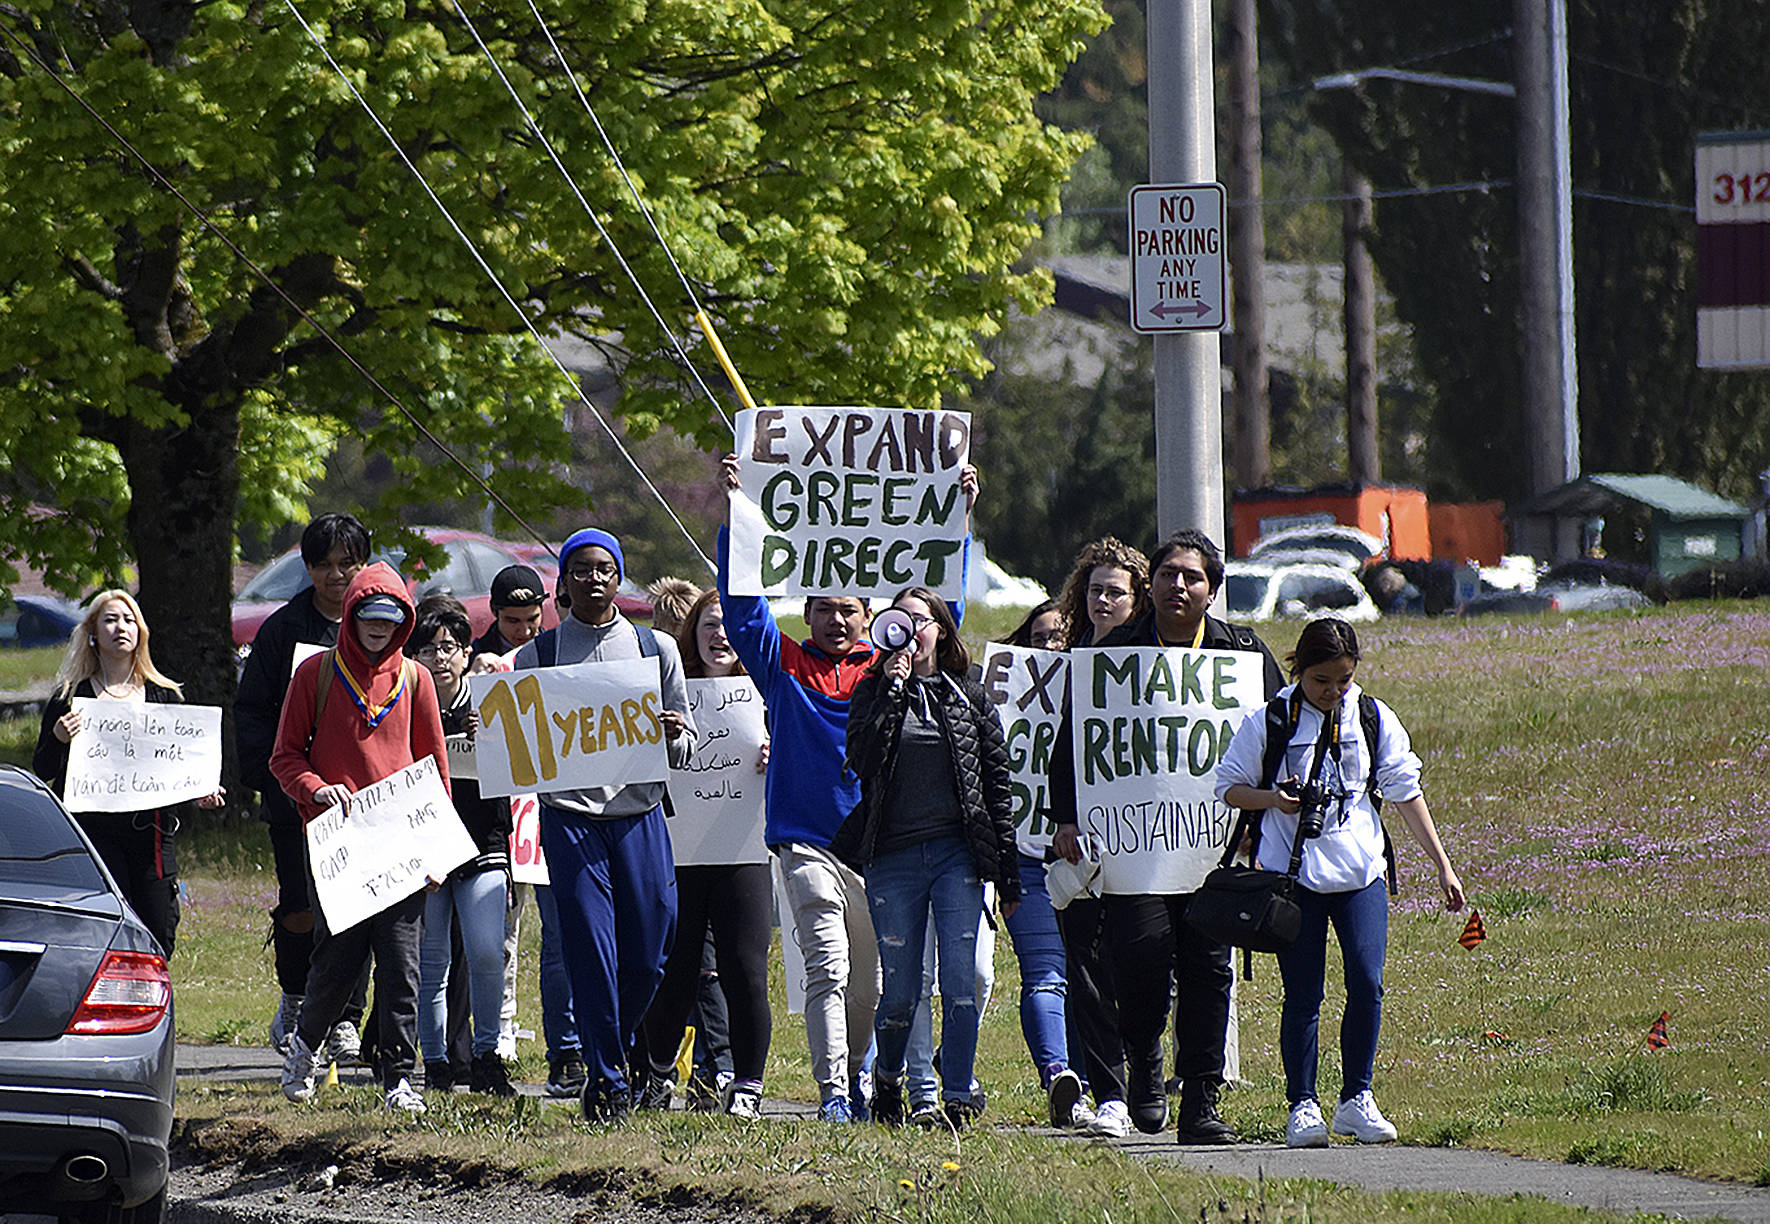 Photo By Haley Ausbun. About 20 Hazen High School students walked out of classes Friday, April 26, and marched to Renton City Hall to ask for sustainability and the fight against climate change locally.